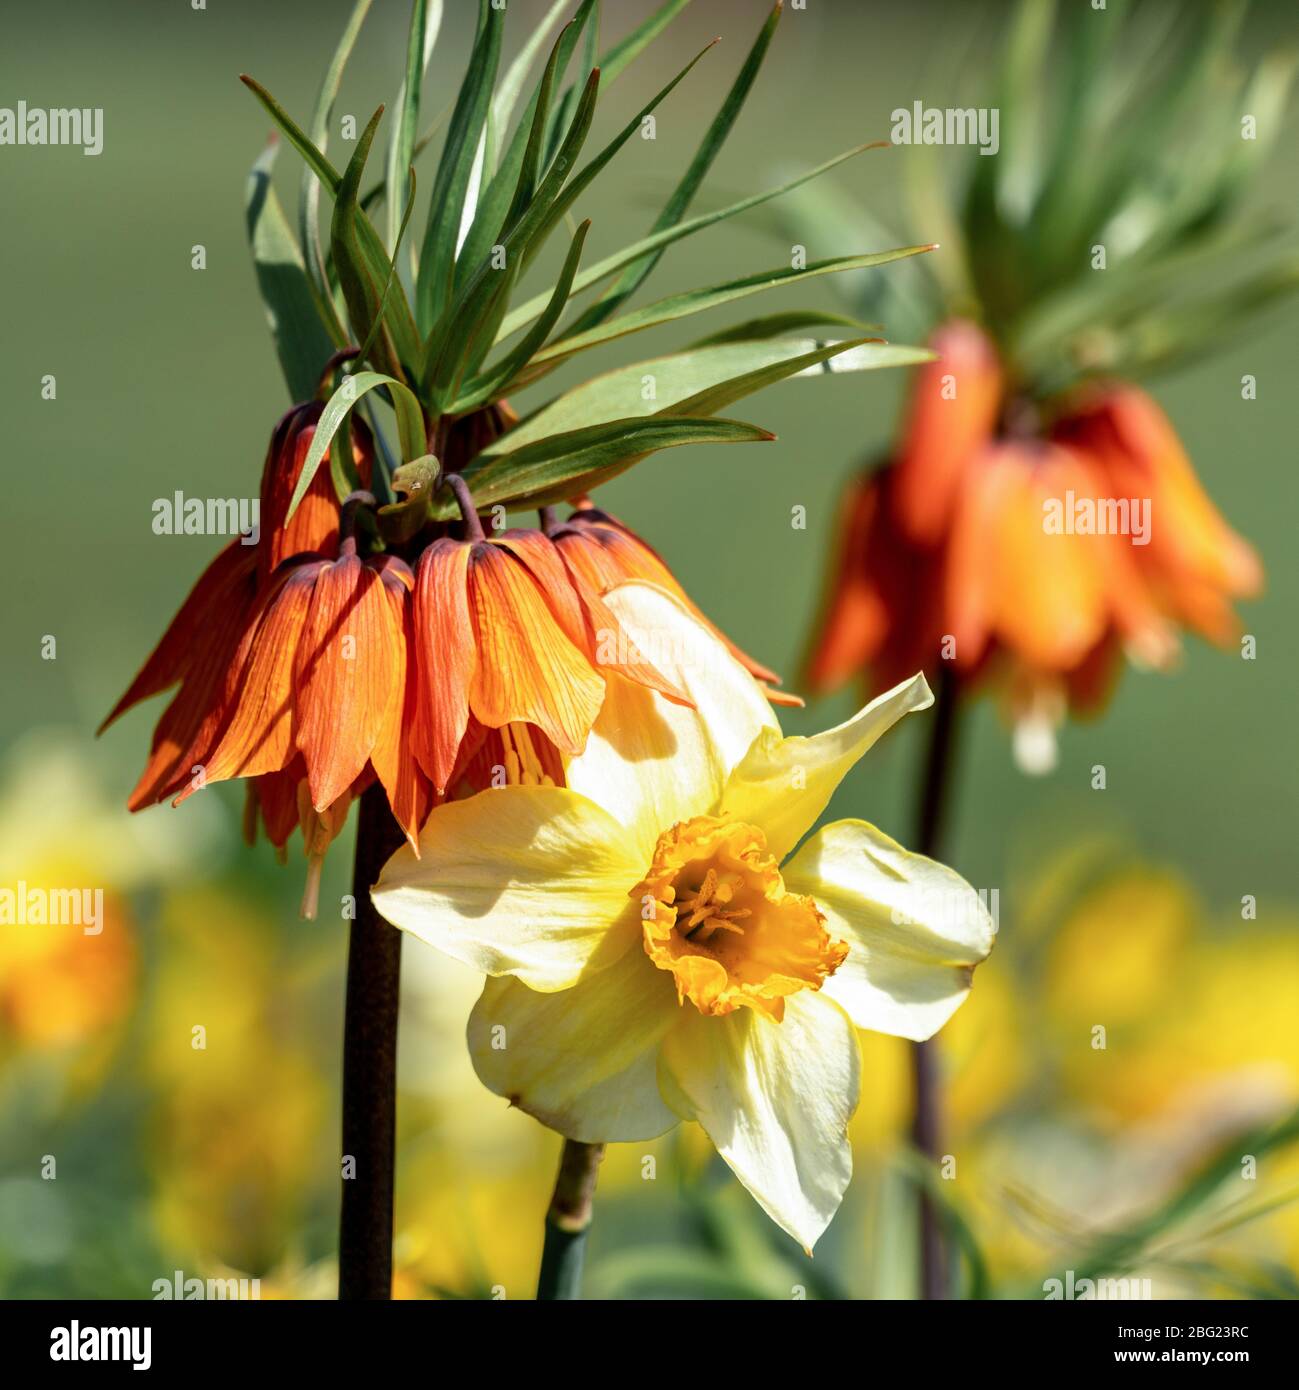 A yellow daffodil (narcissus) acompanied by an orange imperial crown (Fritillaria imperialis) Stock Photo